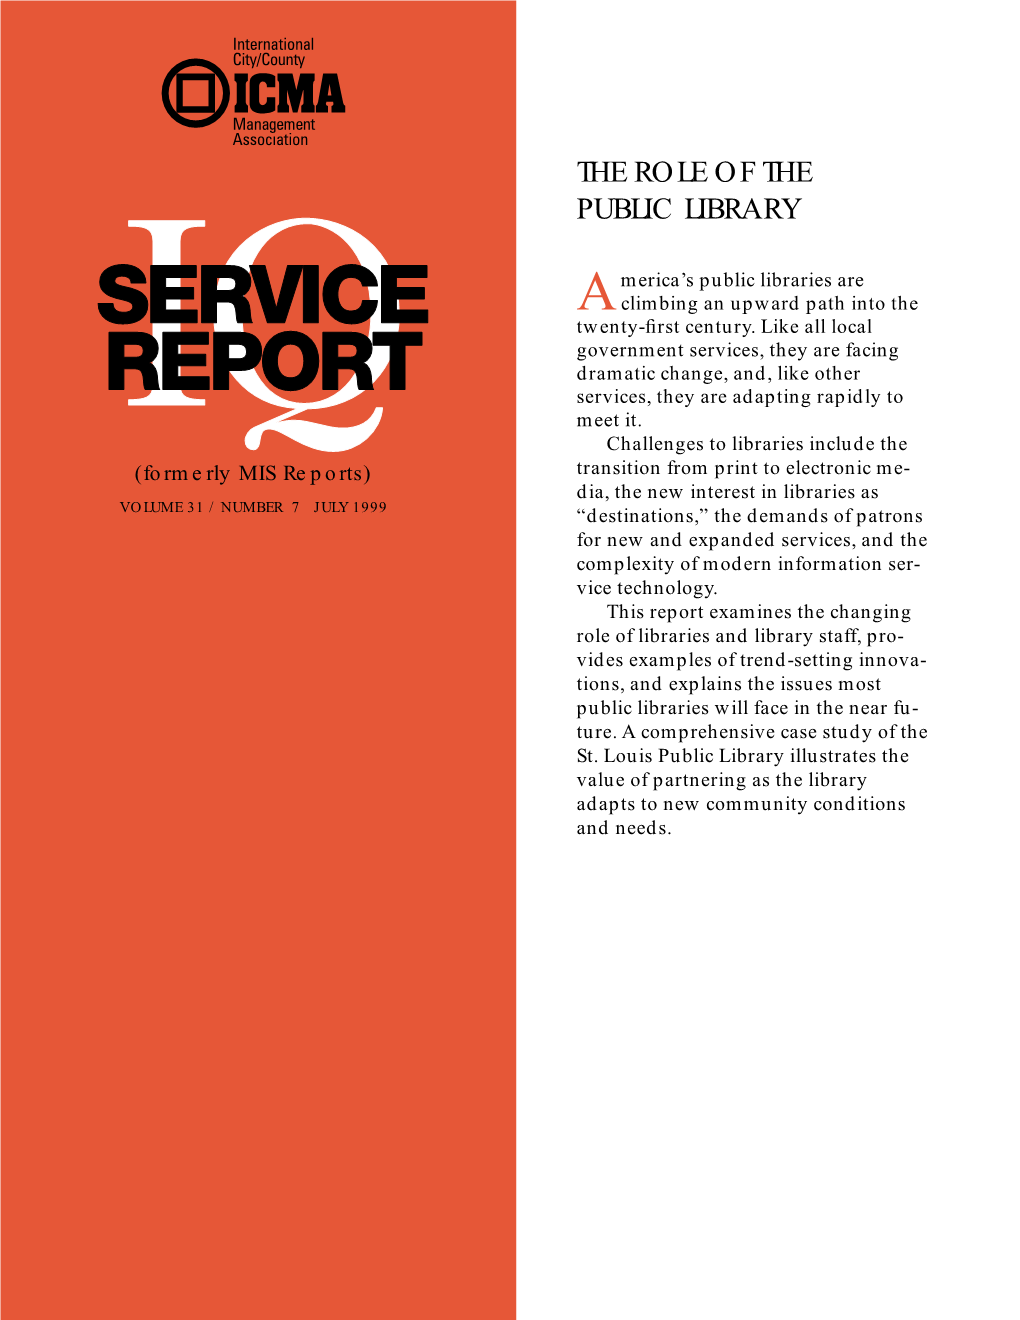 The Role of the Public Library